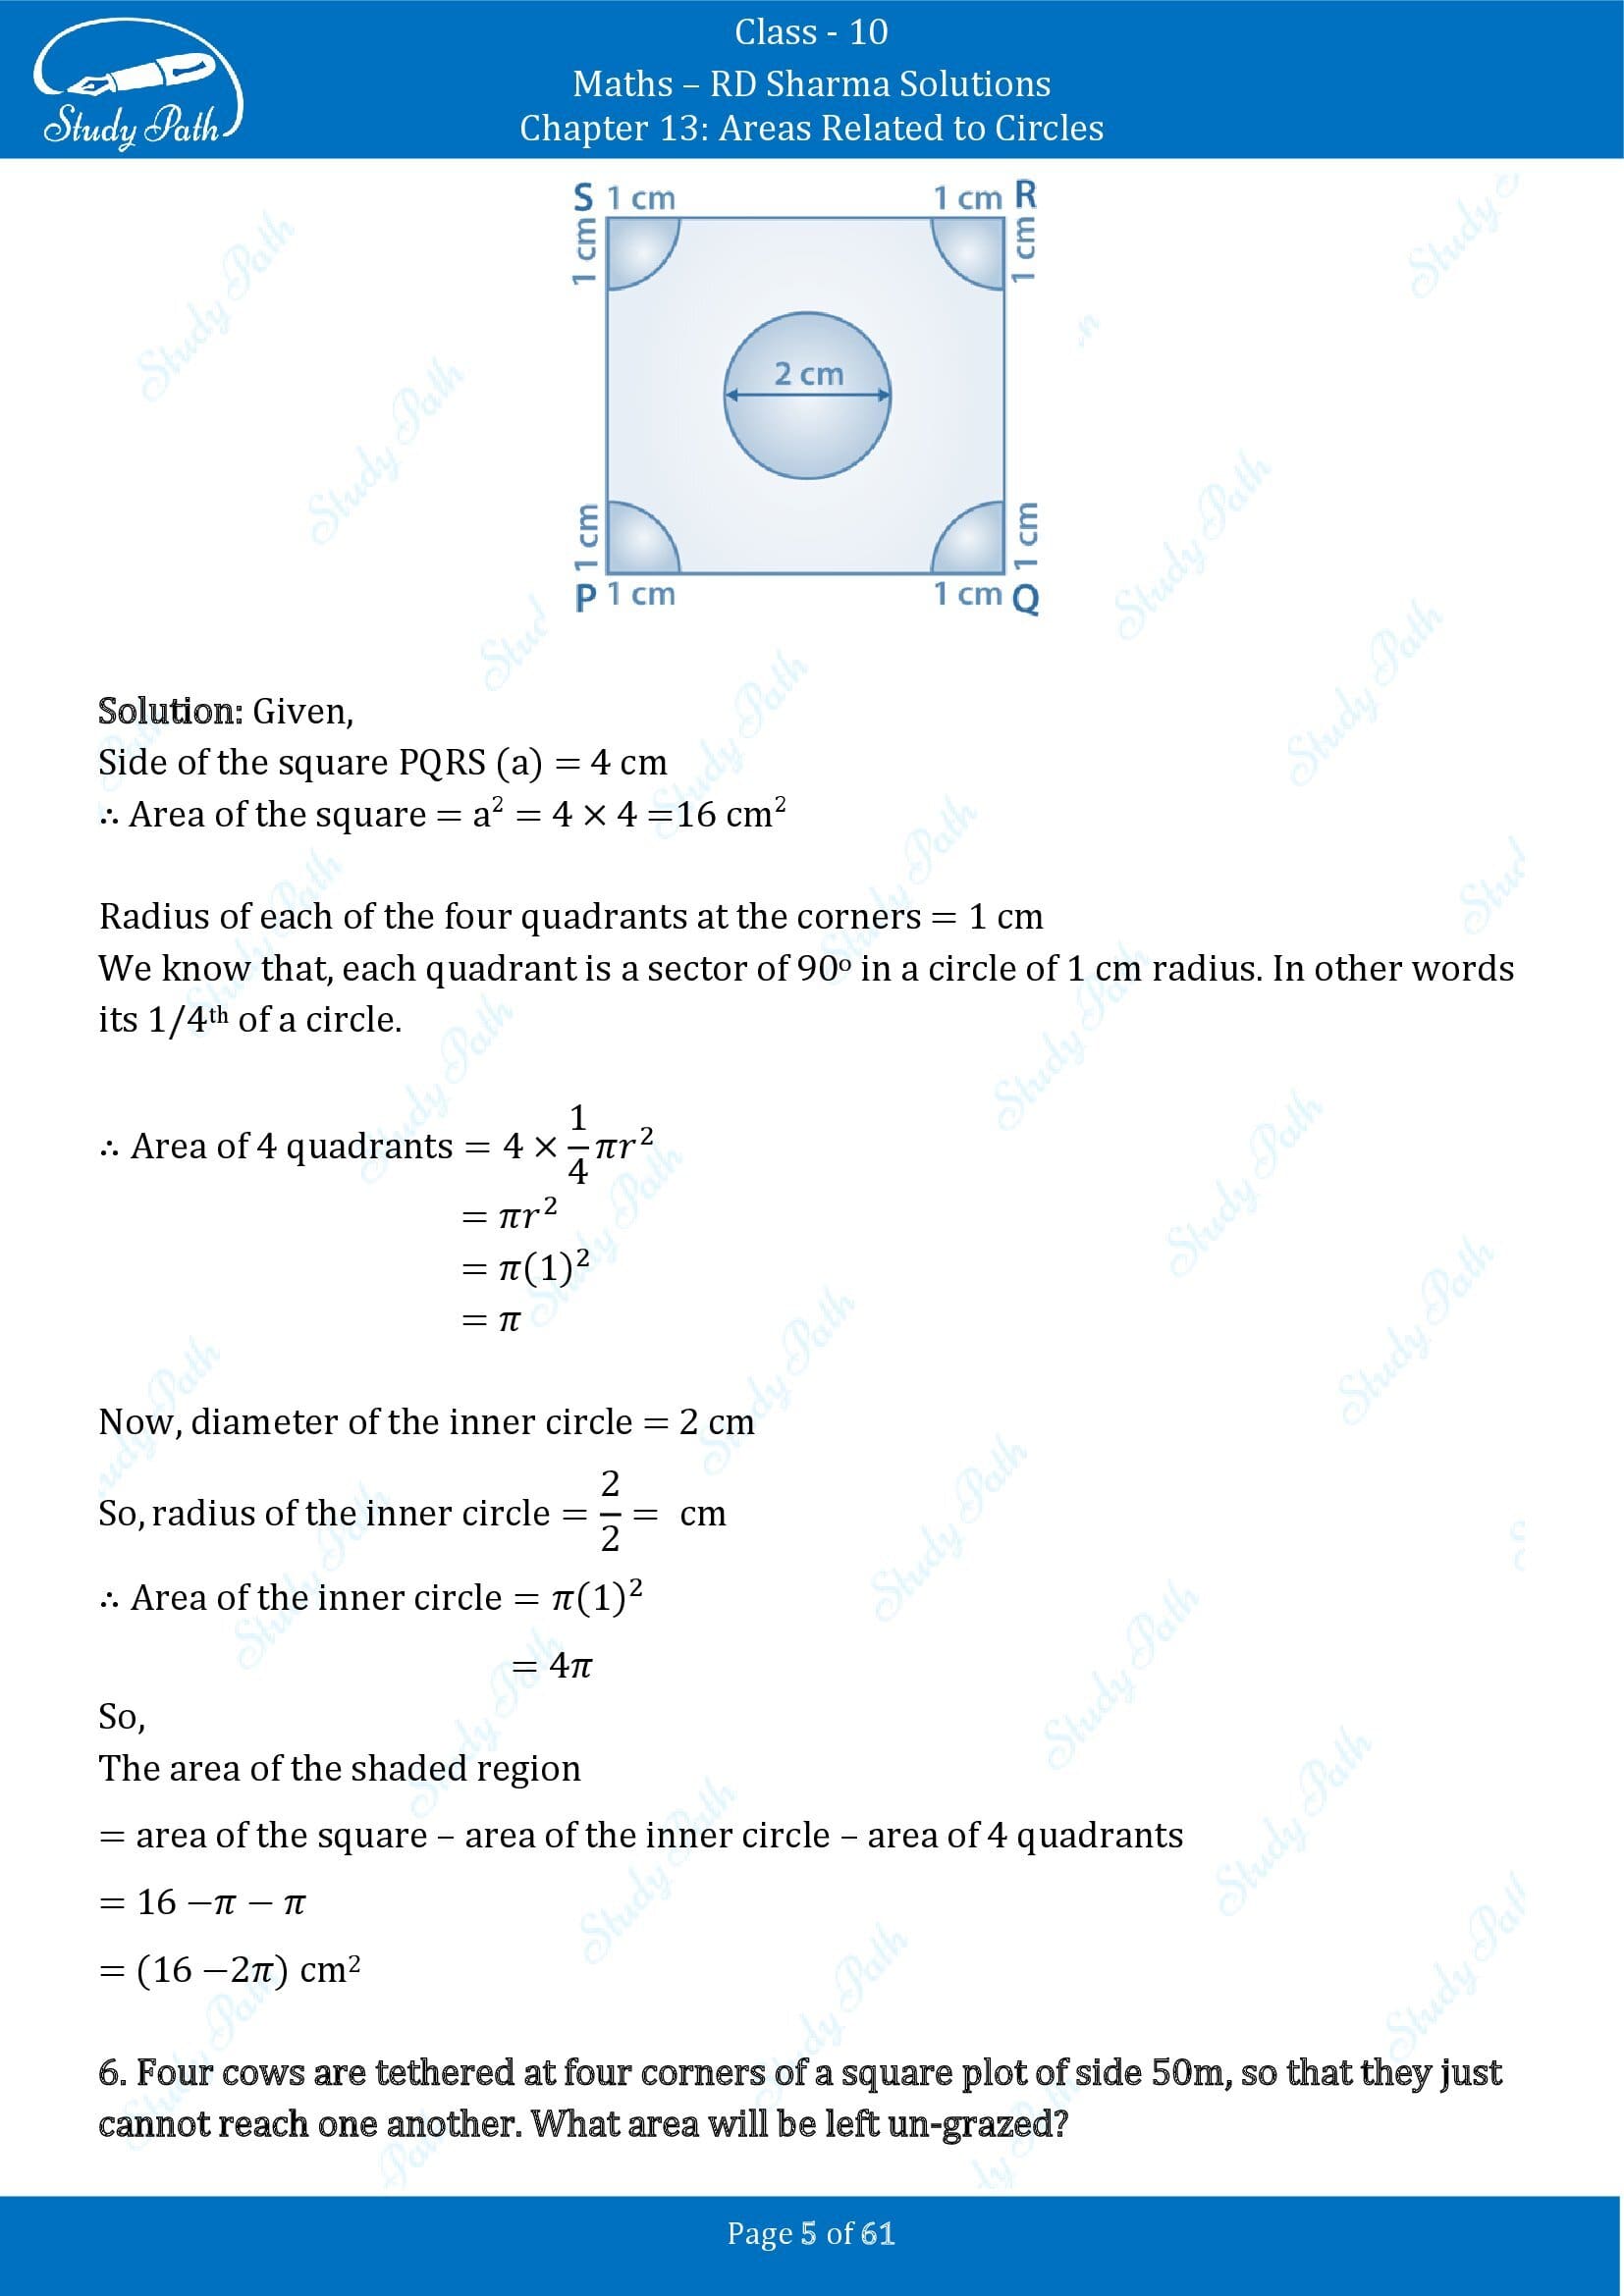 RD Sharma Solutions Class 10 Chapter 13 Areas Related to Circles Exercise 13.4 00005